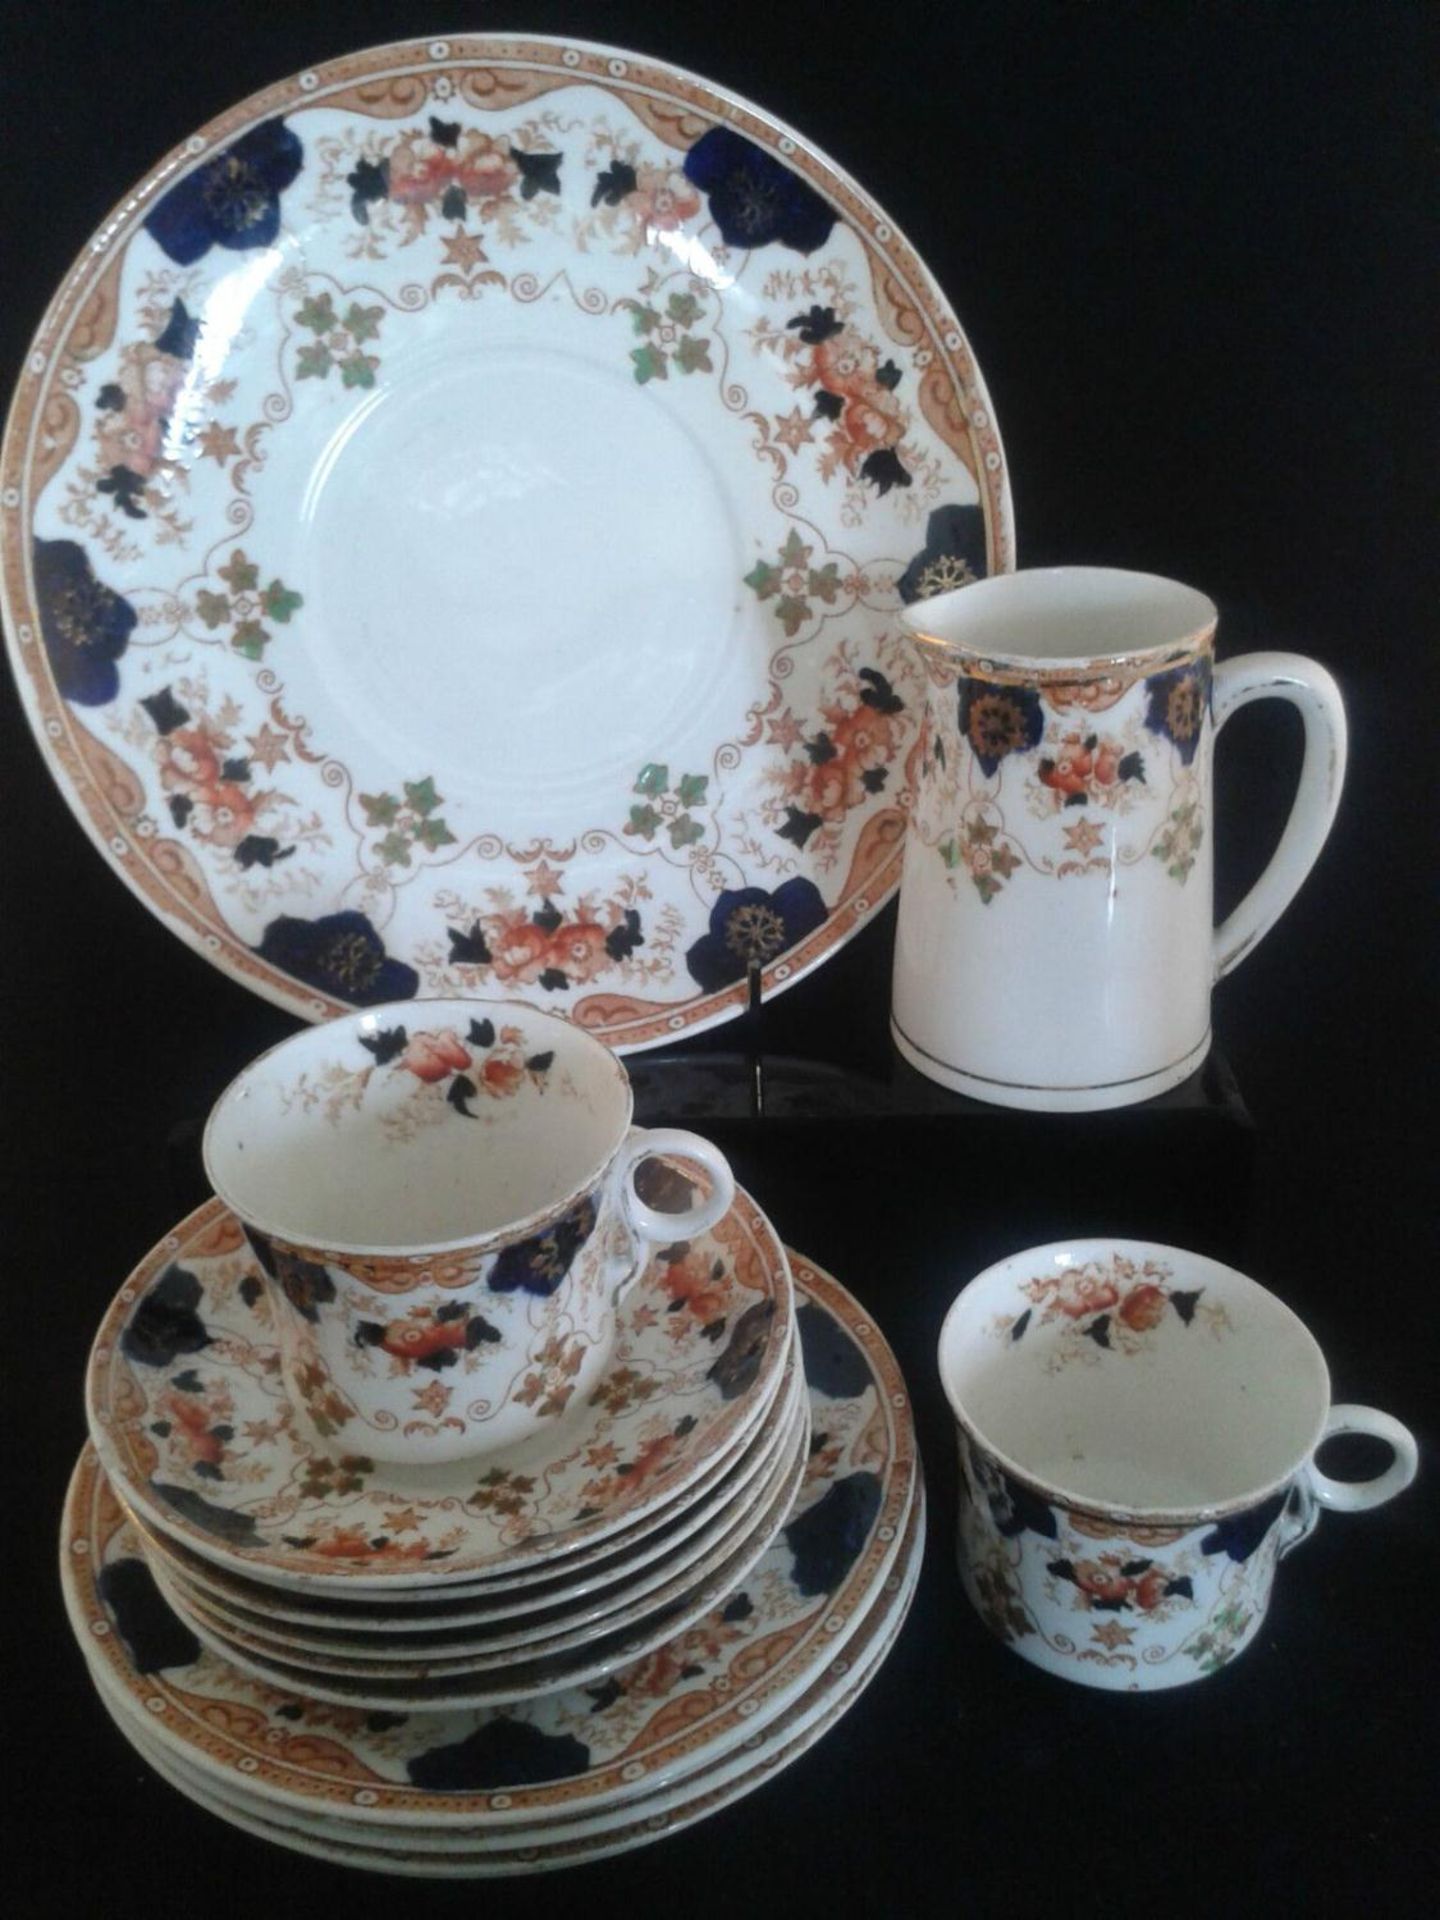 c1900 Afternoon Tea Set Royal Stafford Imari Pattern 4479. 15 piece set. Hand-painted and features a